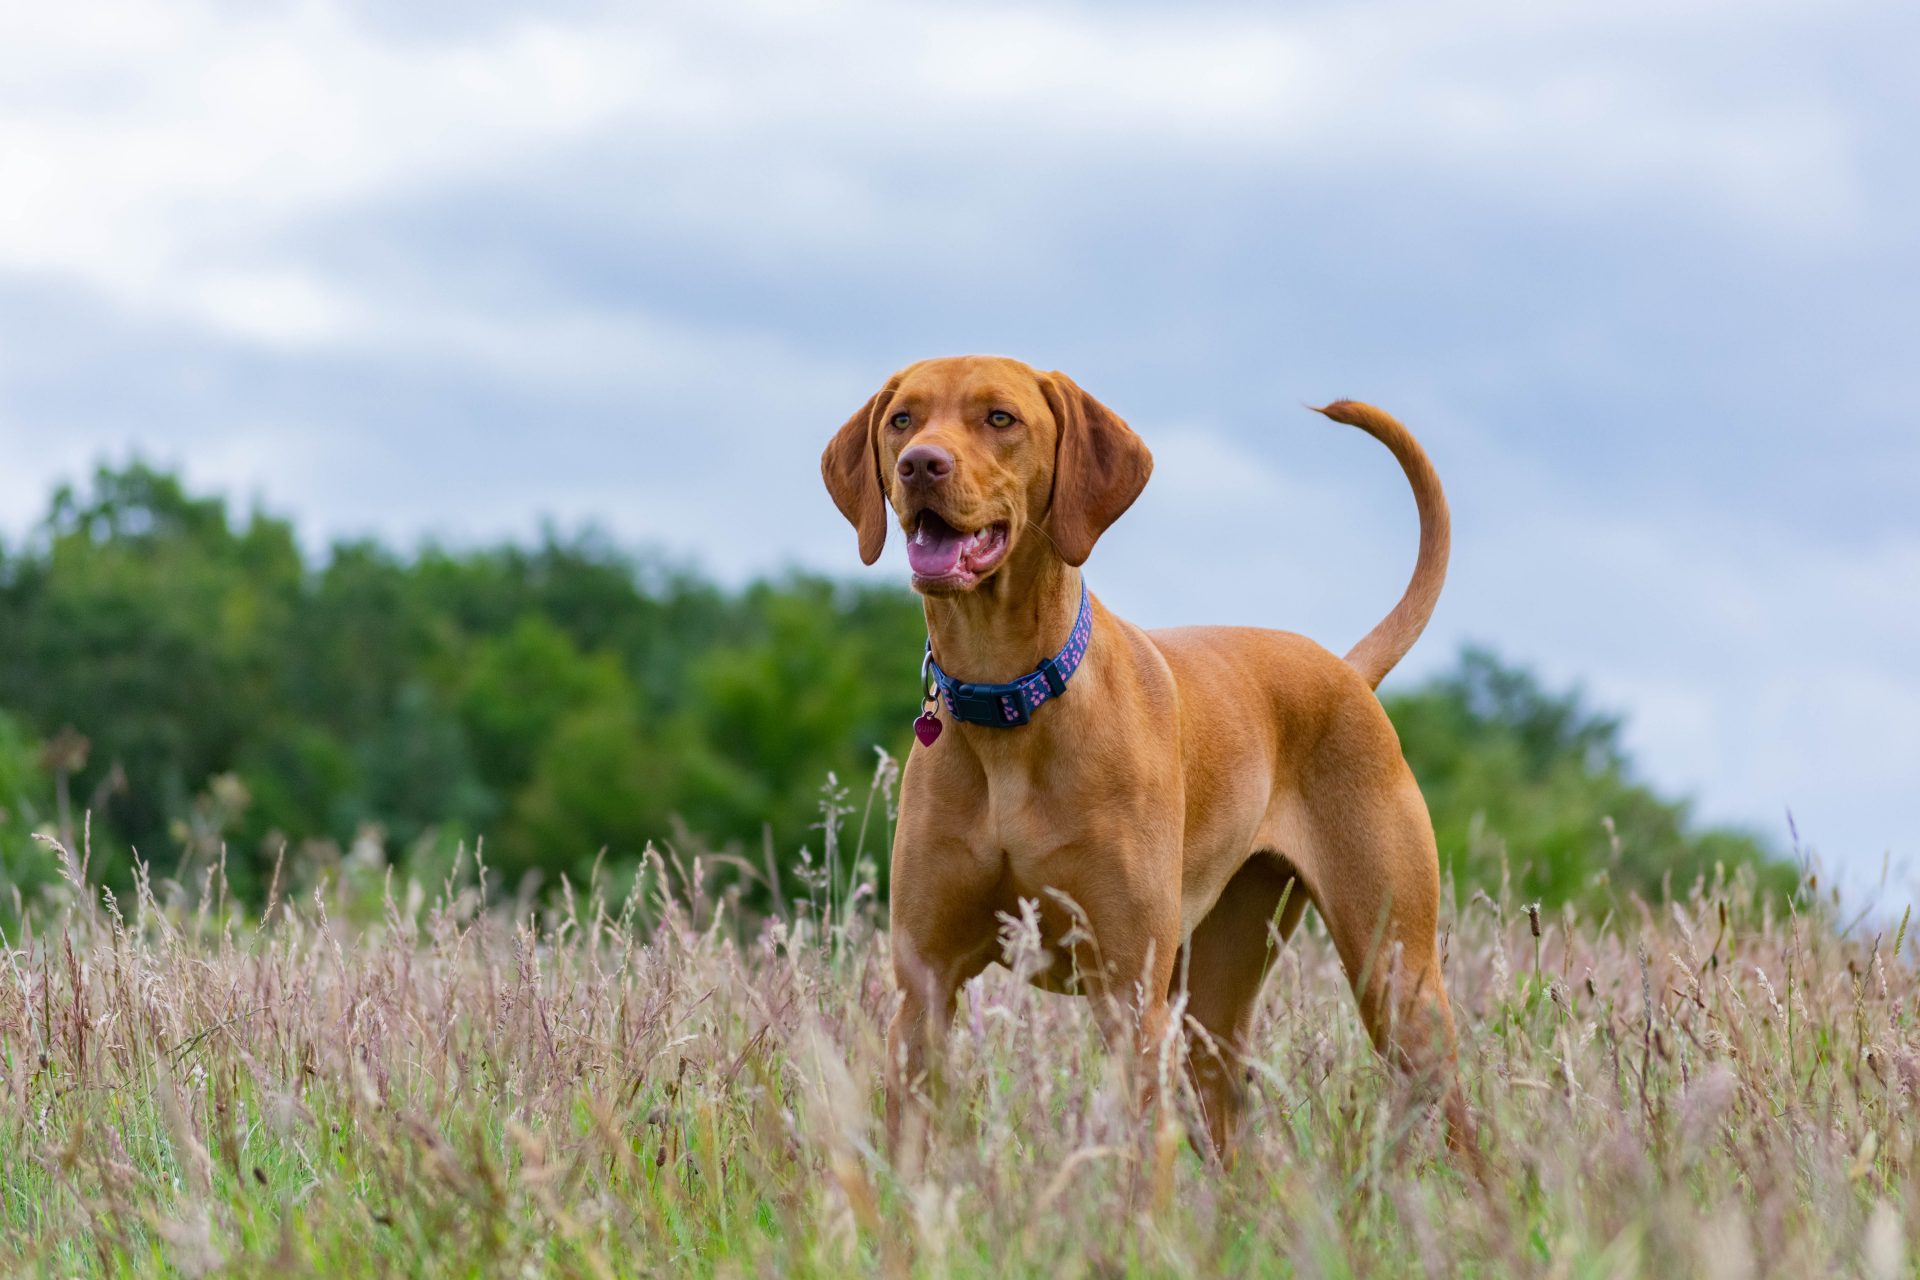 Dog in a field surrounded by grasses